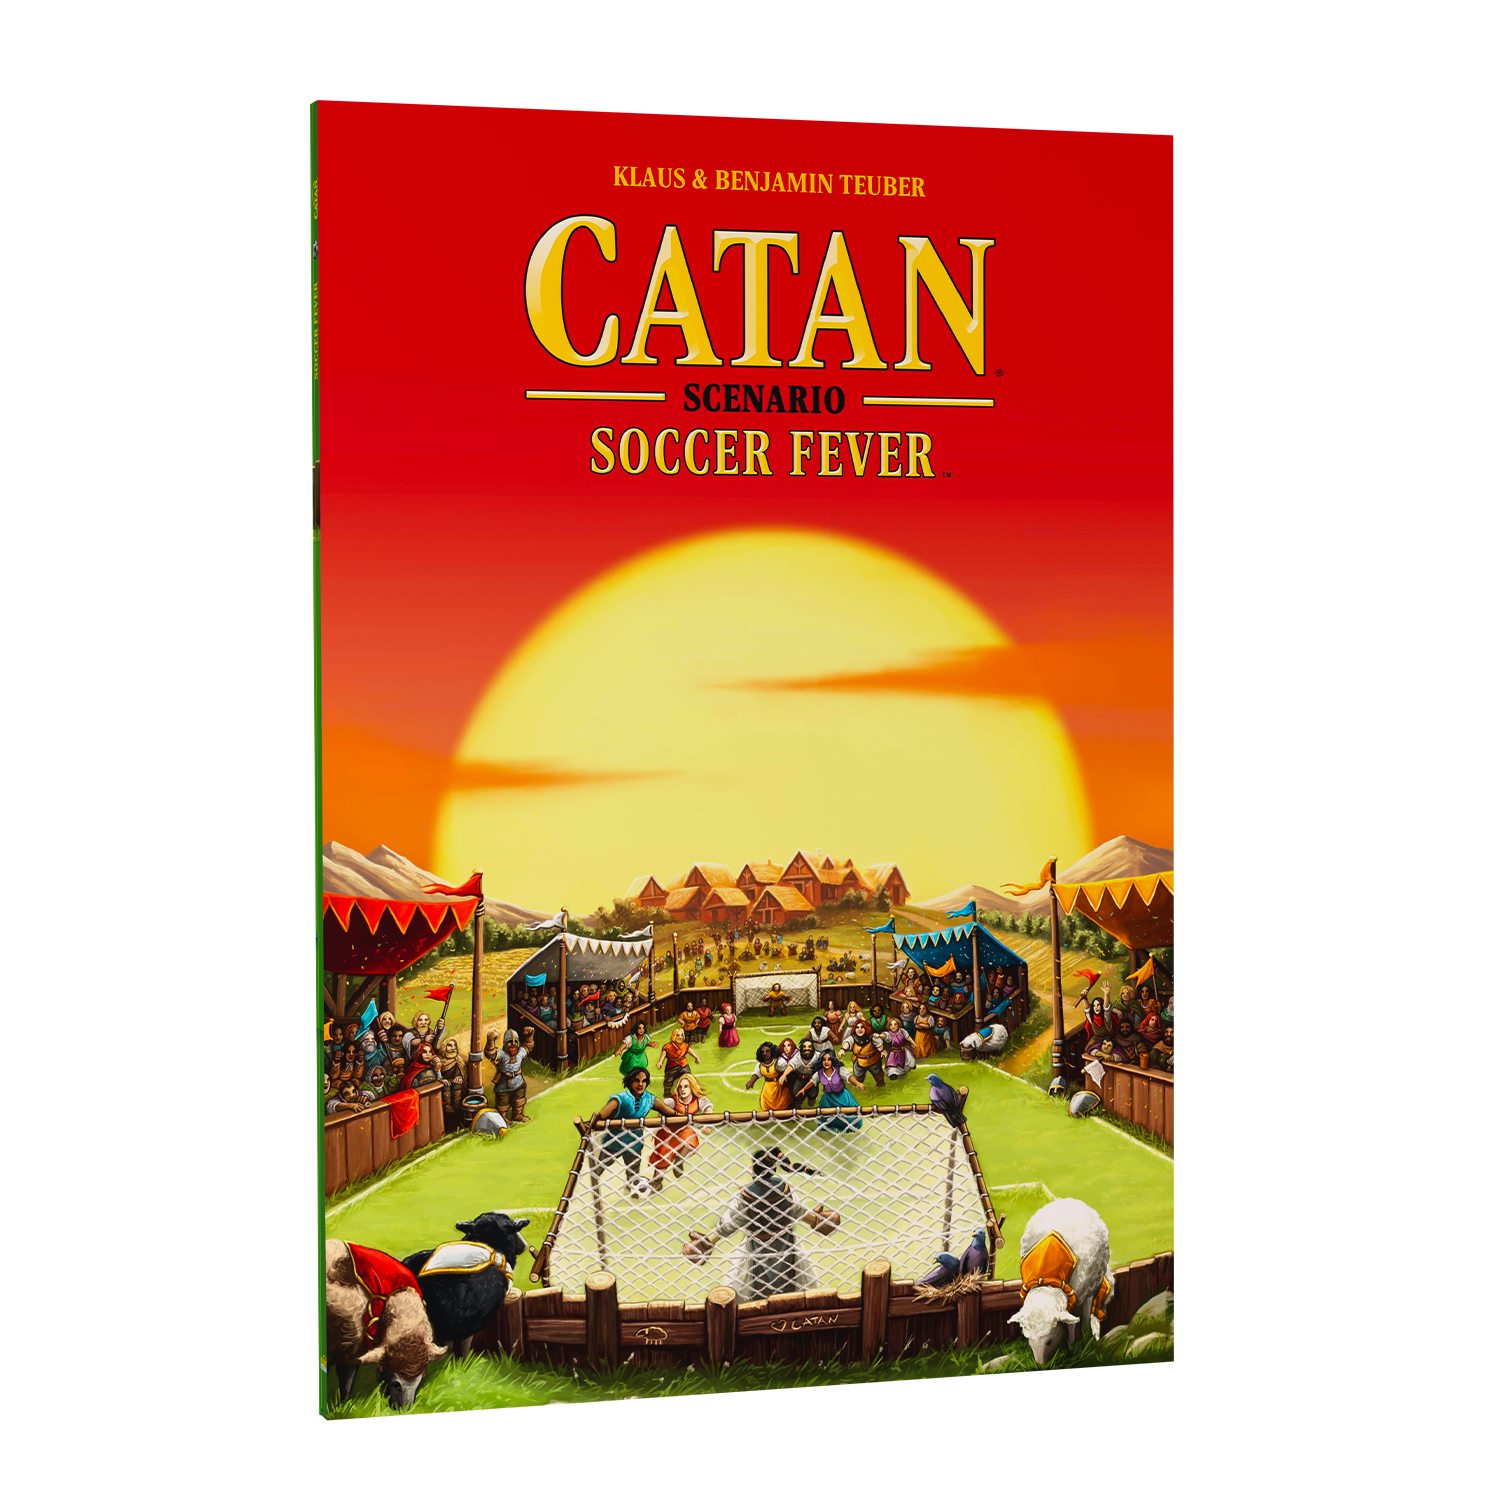 CATAN – Soccer Fever Cover shows a CATAN Sun and sky with a soccer game played in the foreground.